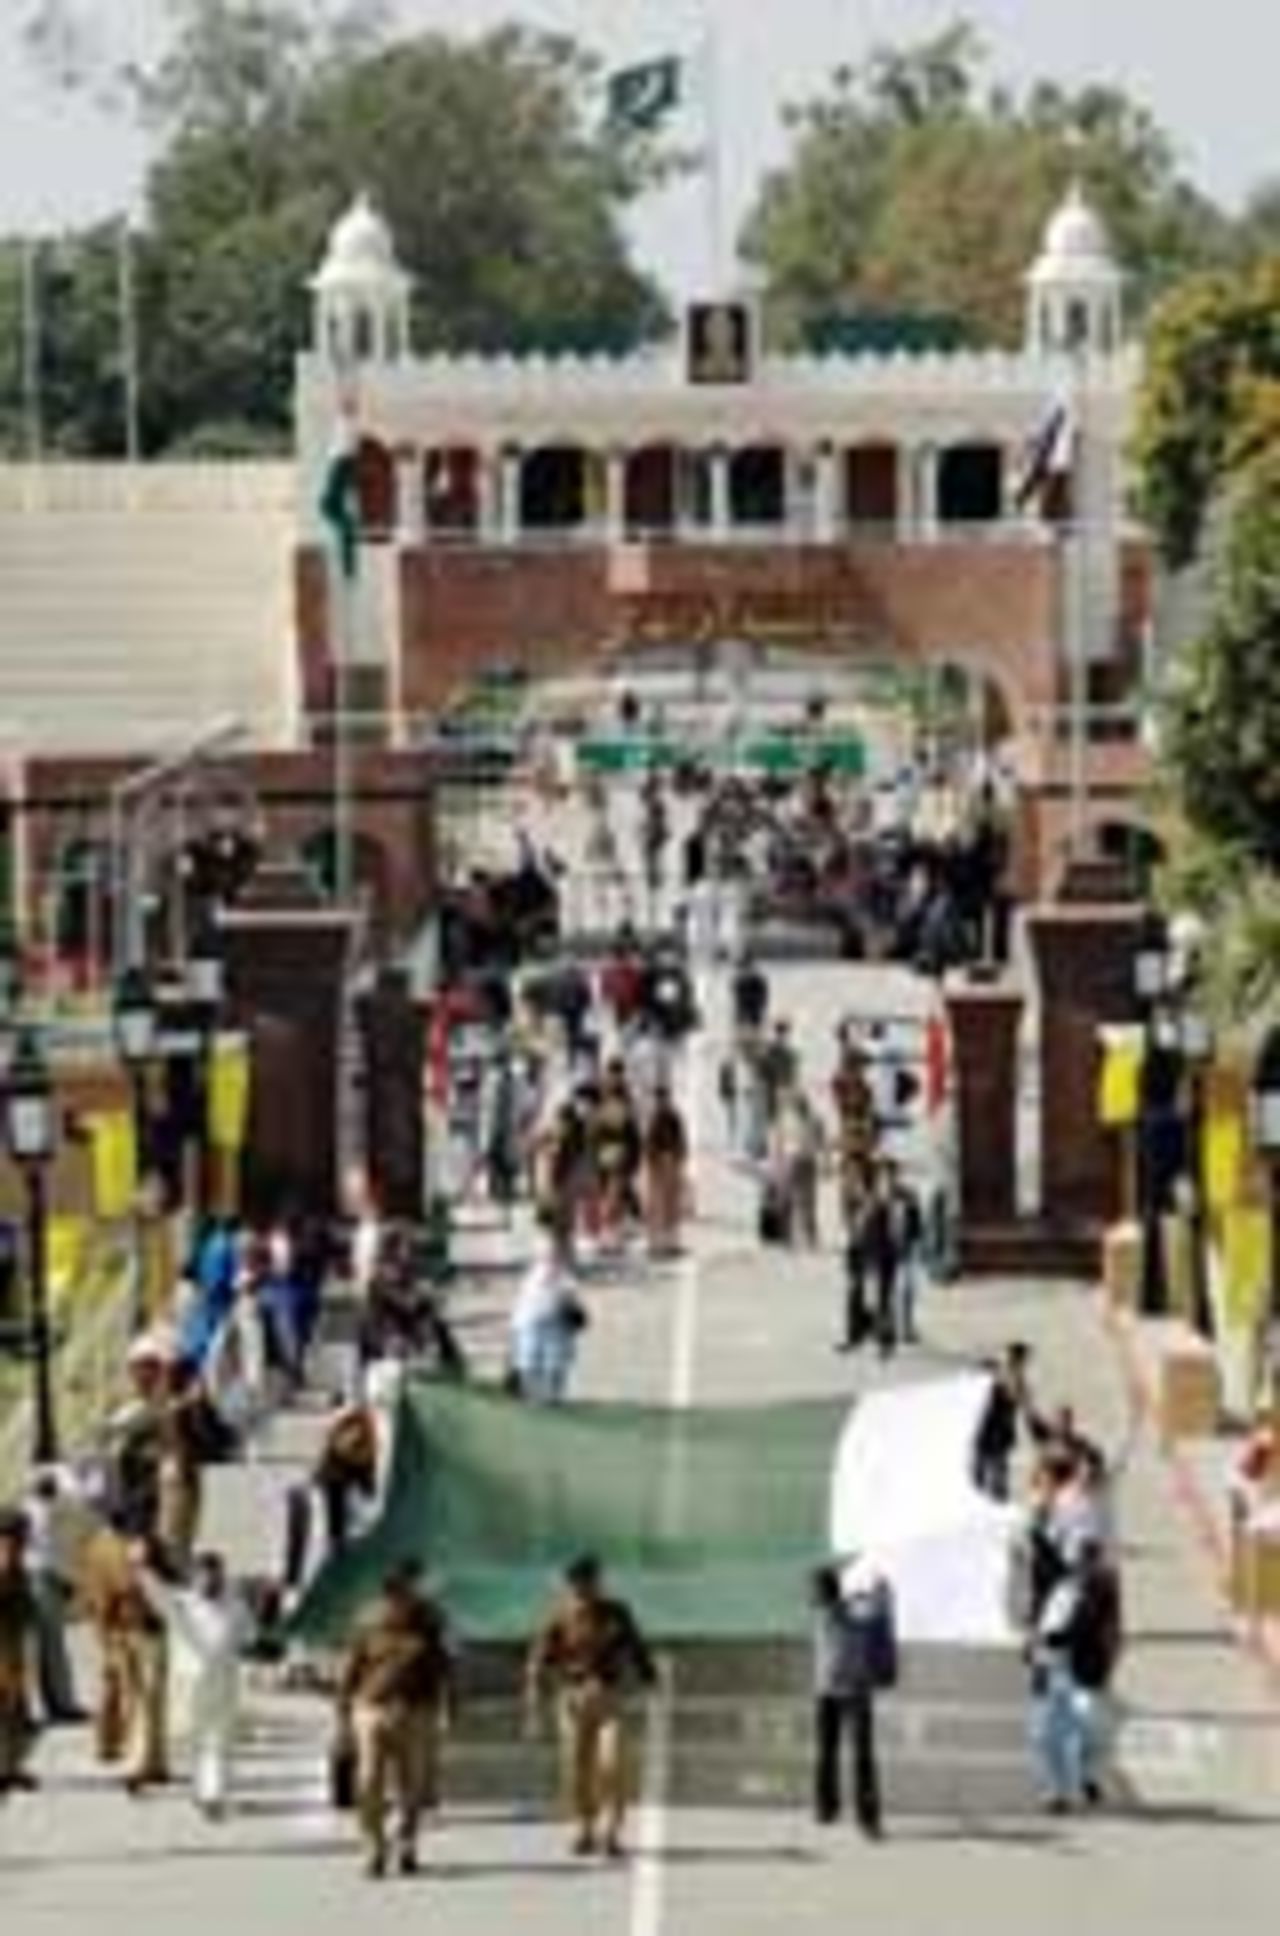 Pakistani fans cross the border and walk into India through the gates at Wagah, March 6, 2005